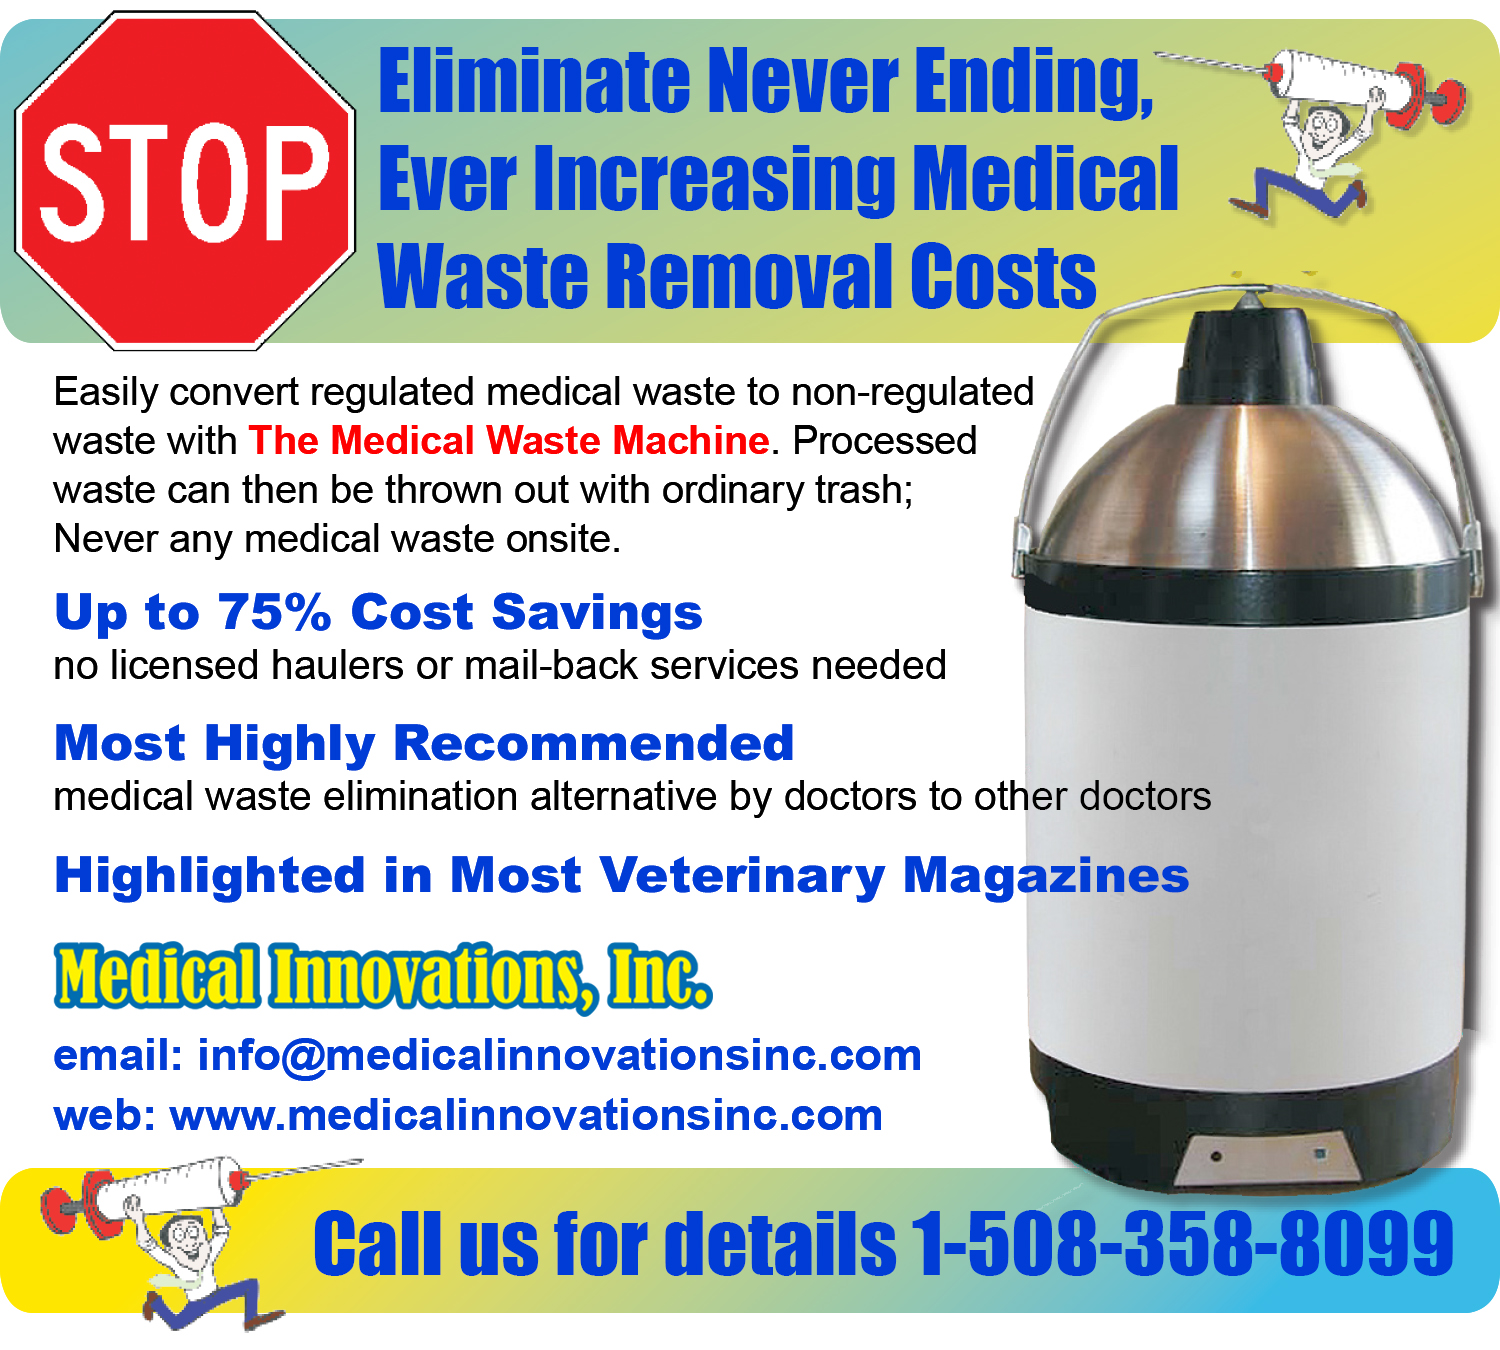 Eliminate Increasing Medical Waste Removal Costs